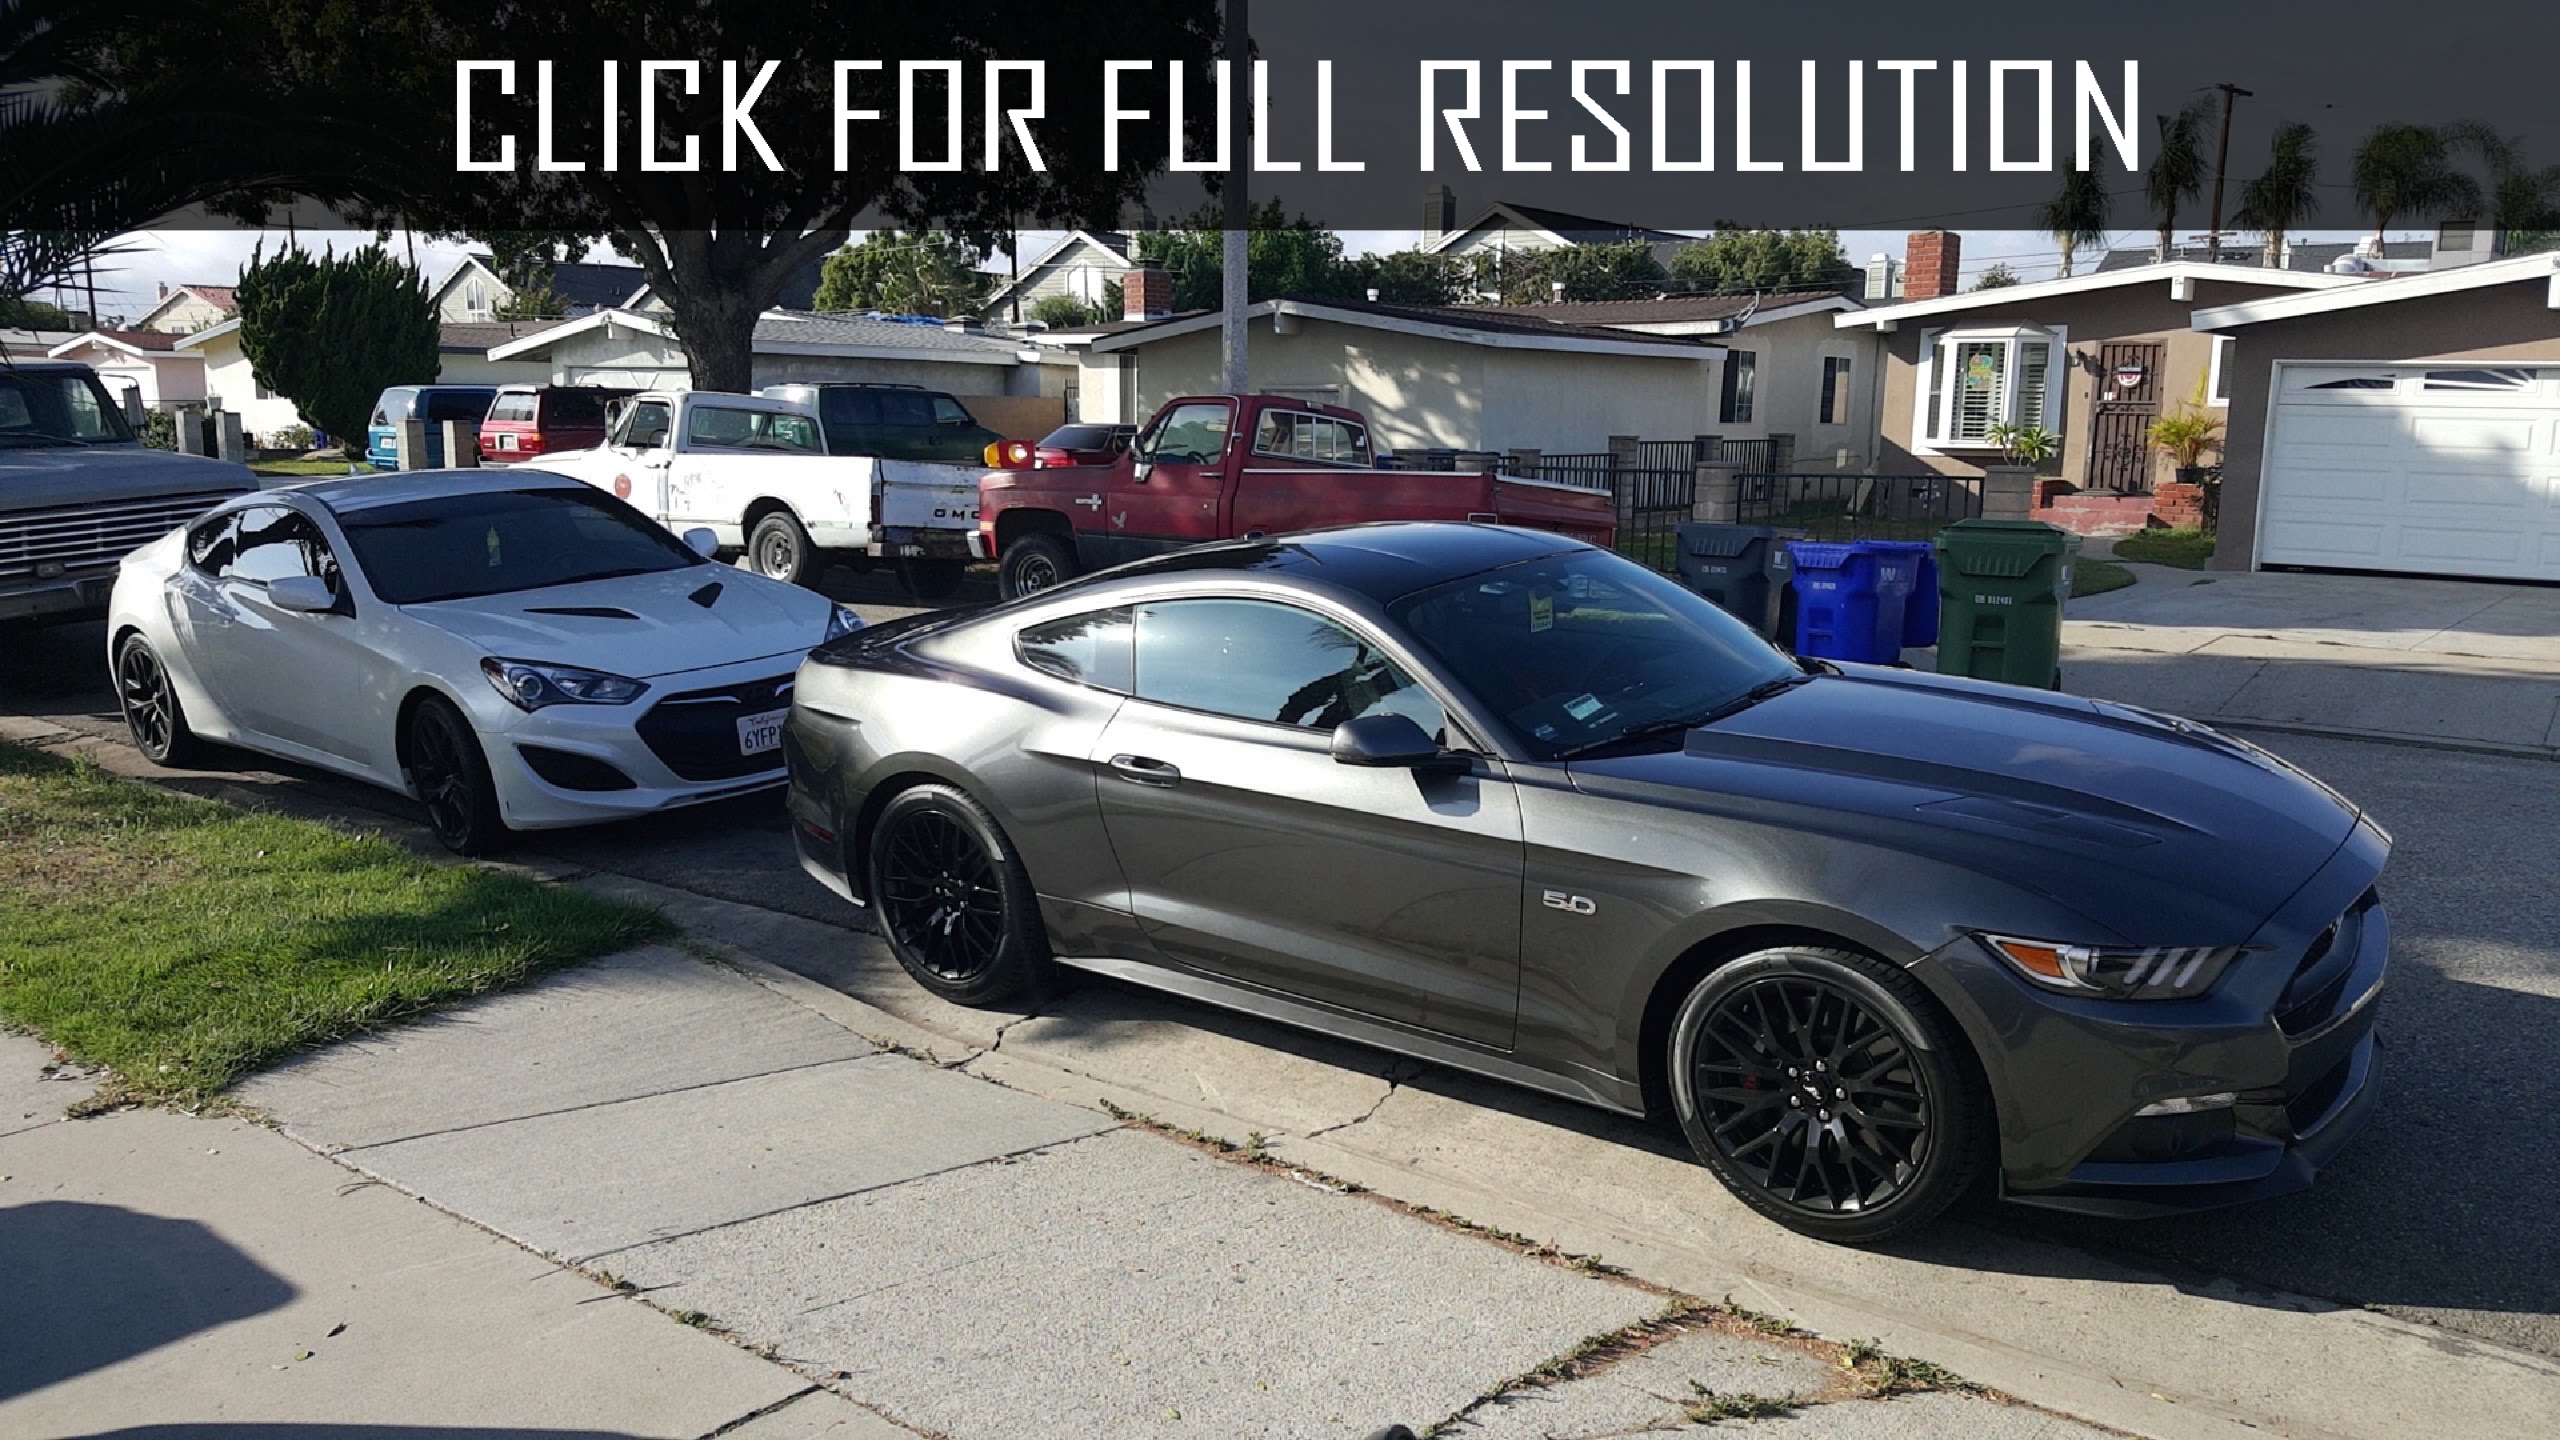 16 Ford Mustang Gt Best Image Gallery 10 13 Share And Download